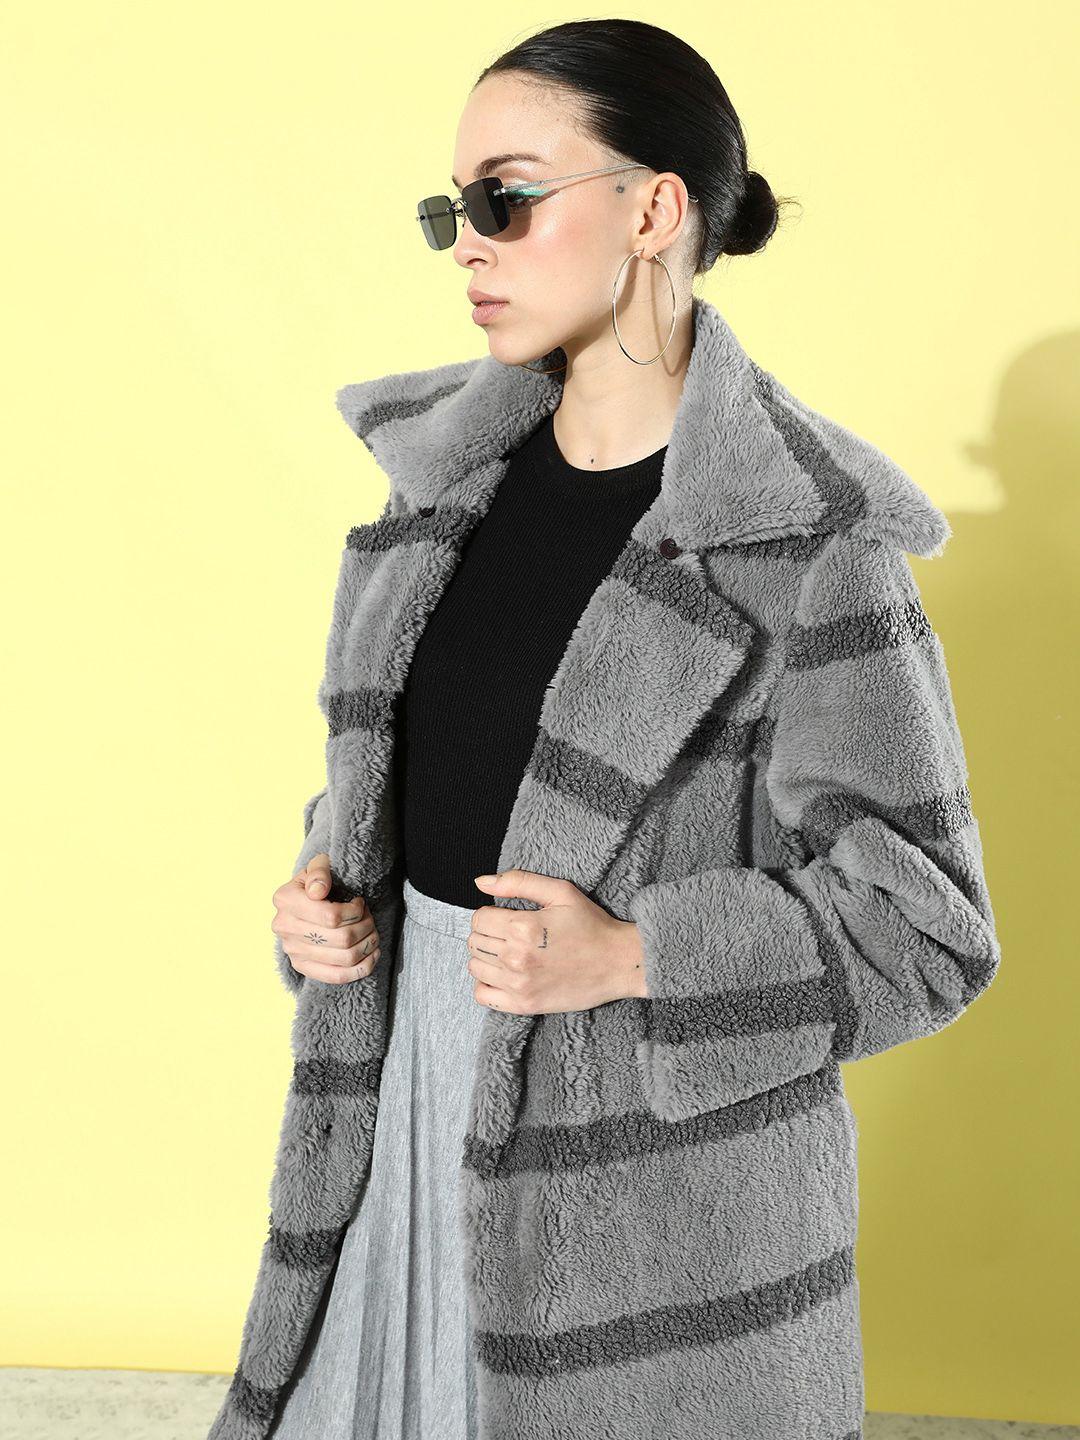 the roadster life co. december frosty winters soft textures fur trench coat